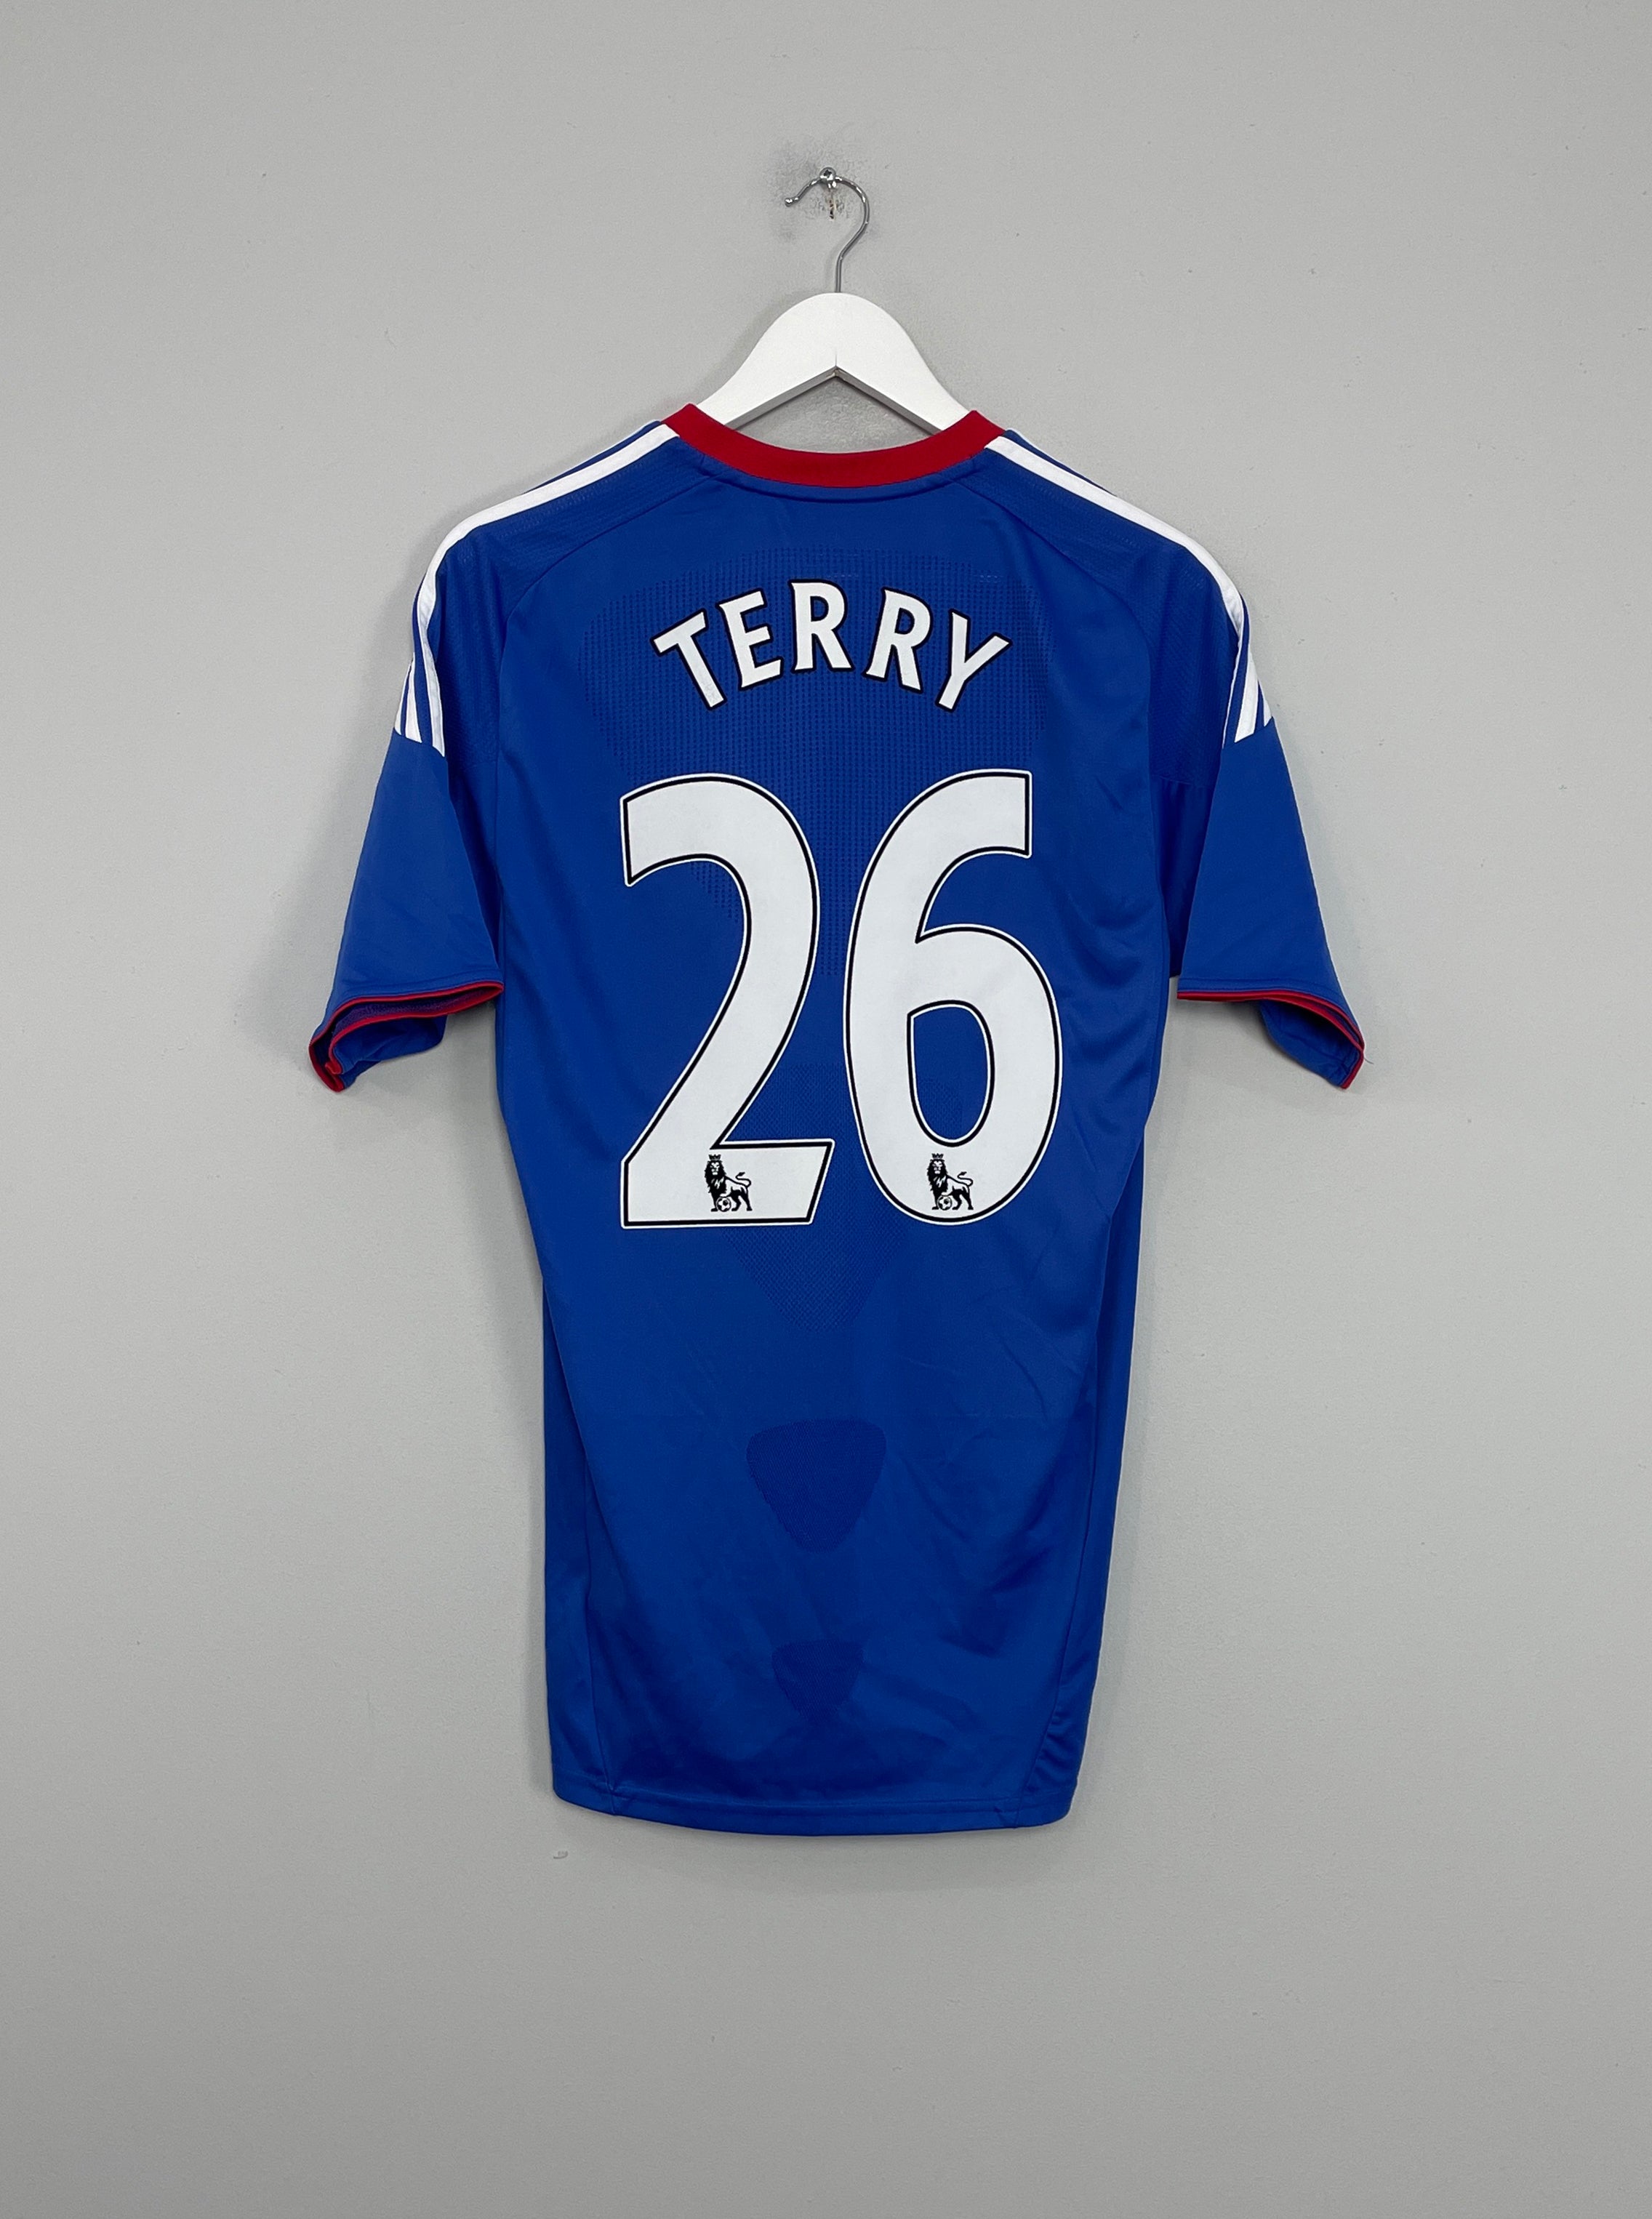 2010/11 CHELSEA TERRY #26 HOME SHIRT (S) ADIDAS